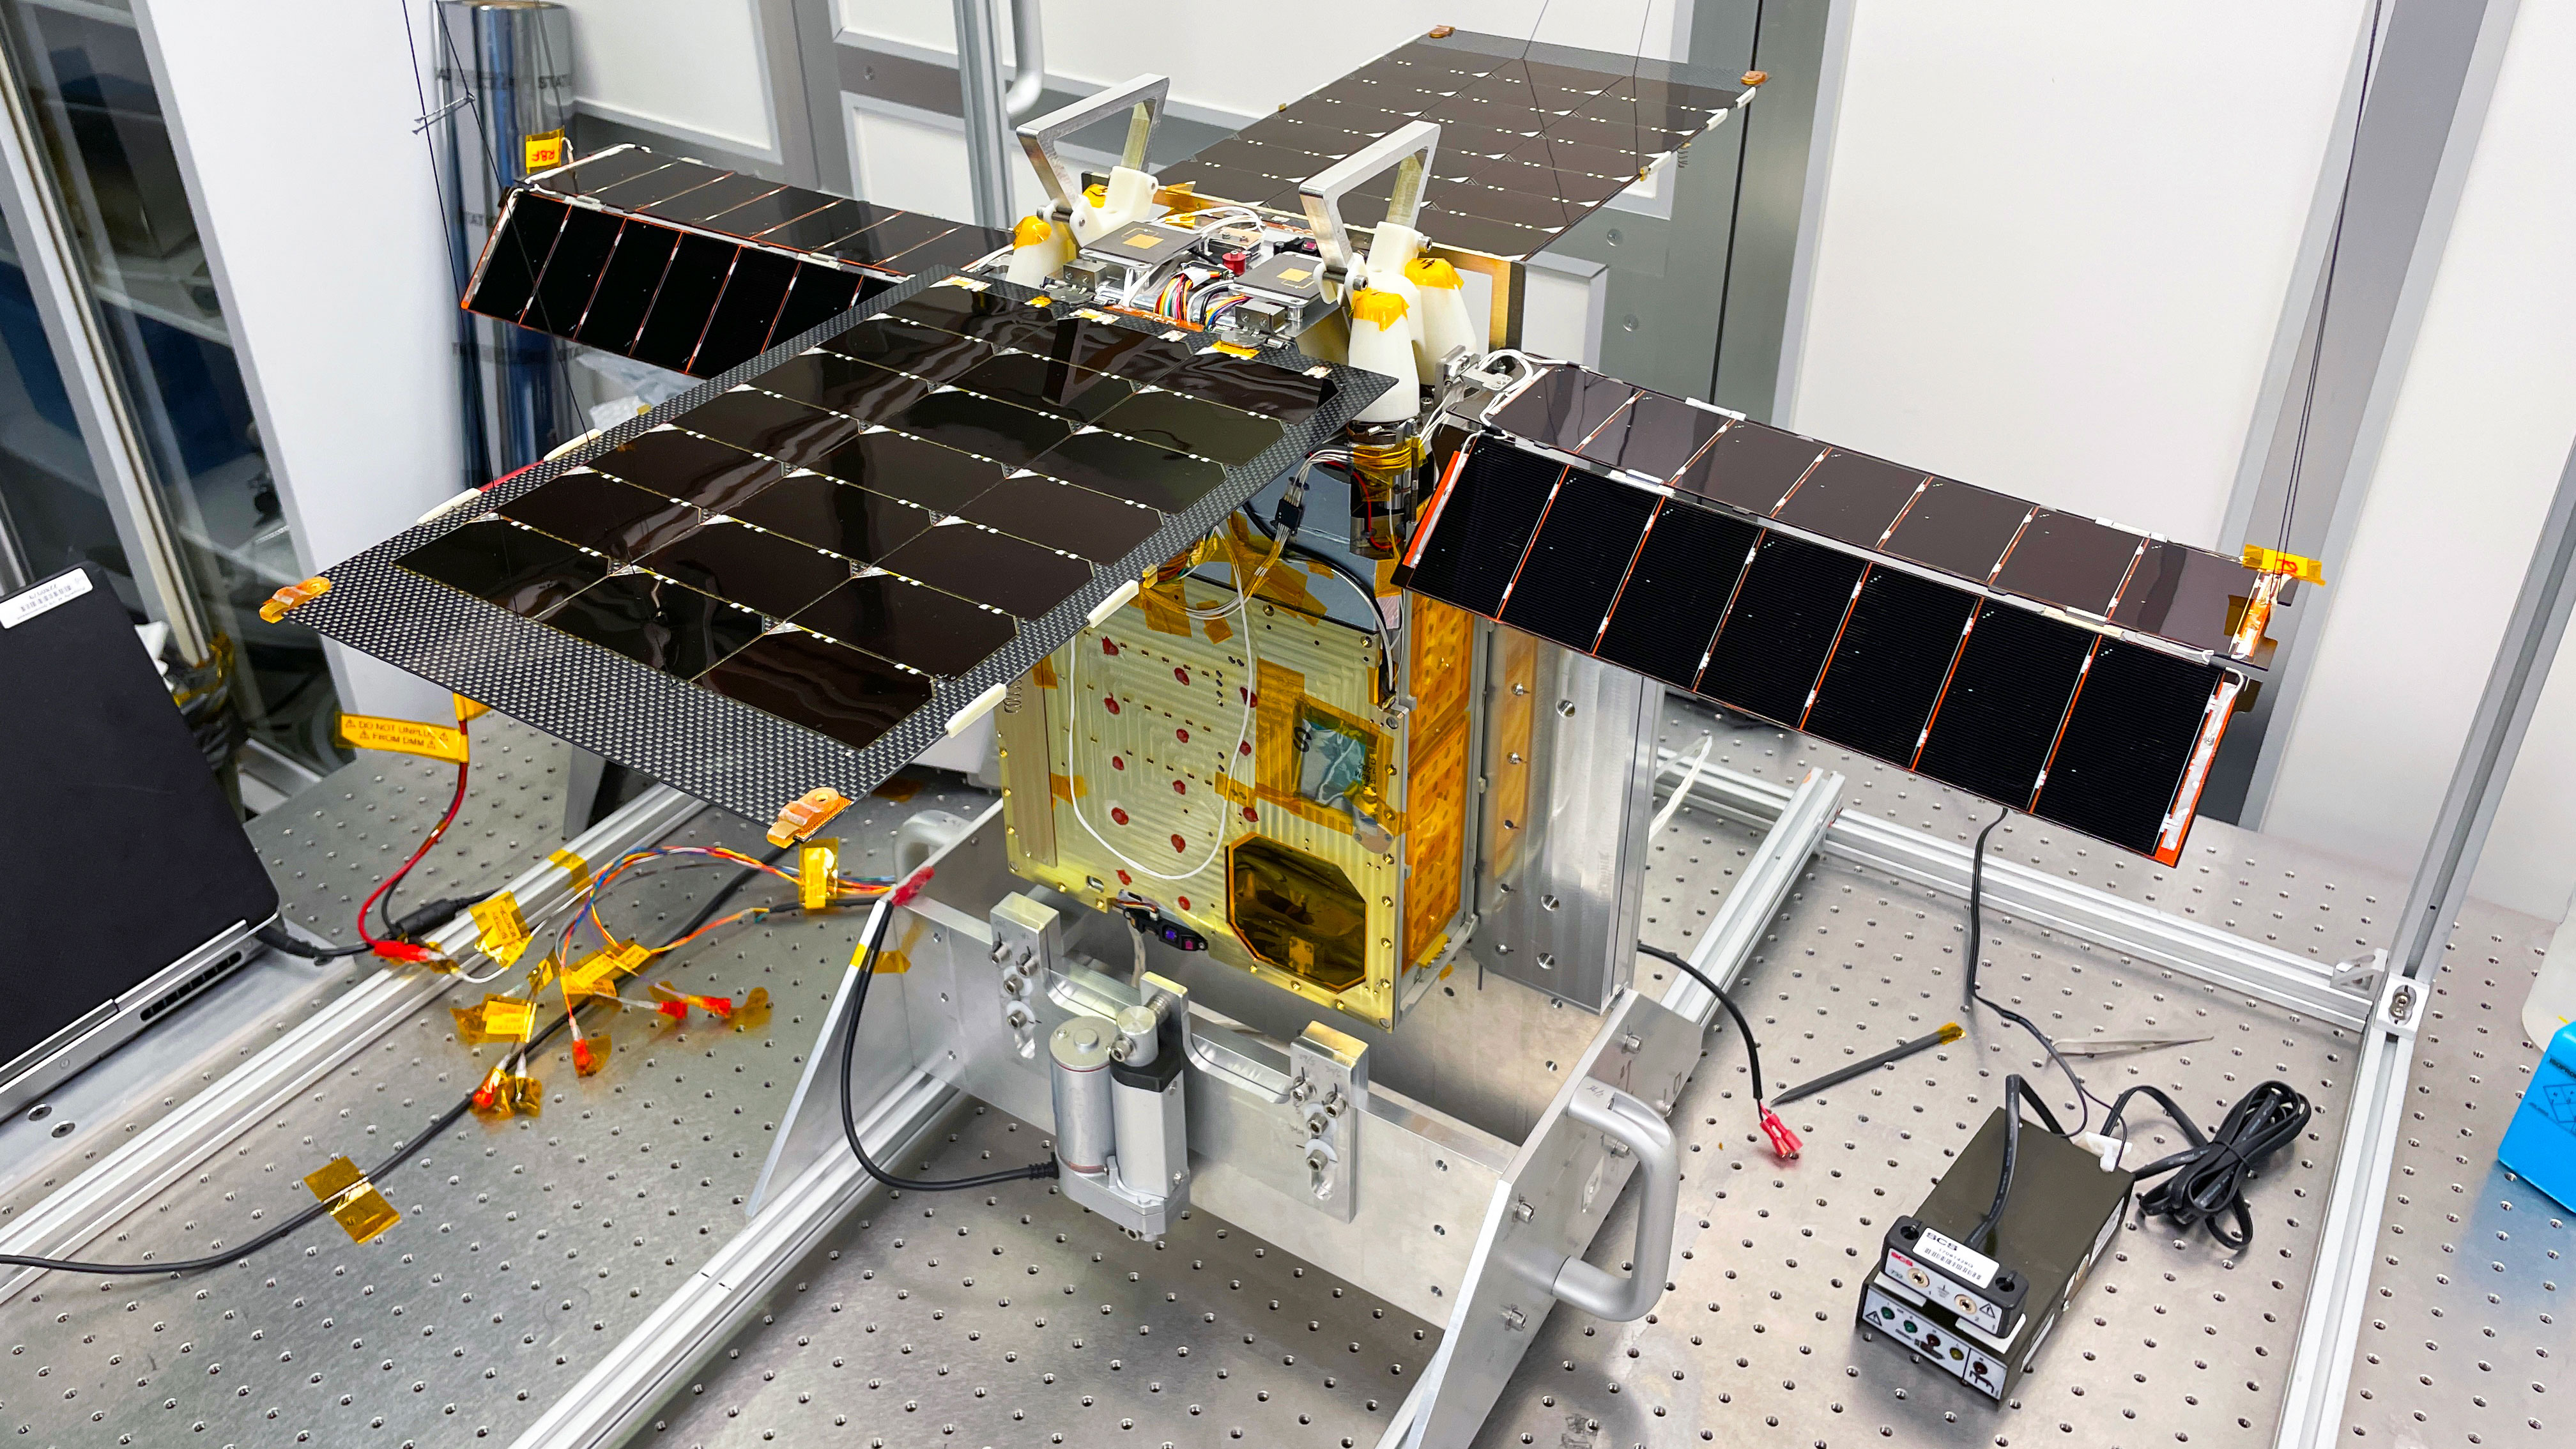 A photo of the Lunar Flashlight spacecraft undergoing pre-launch testing.